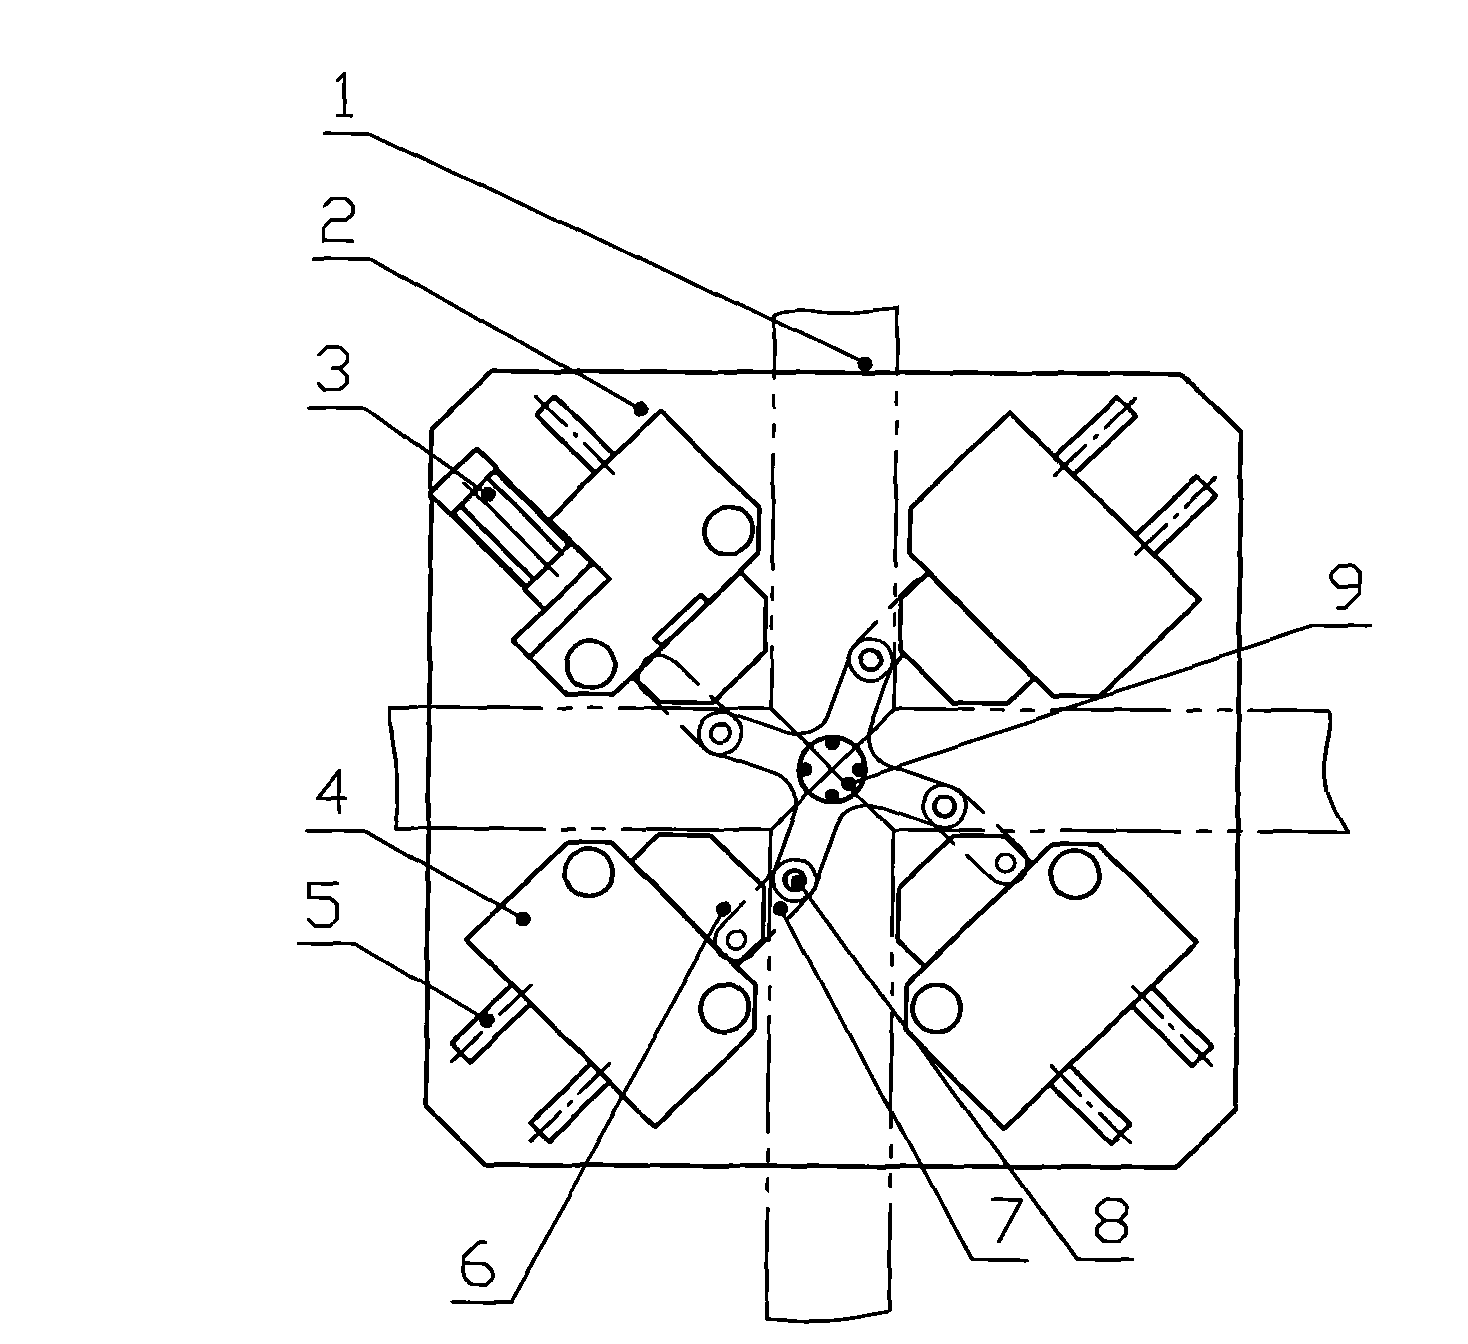 Synchronous centering and positioning device